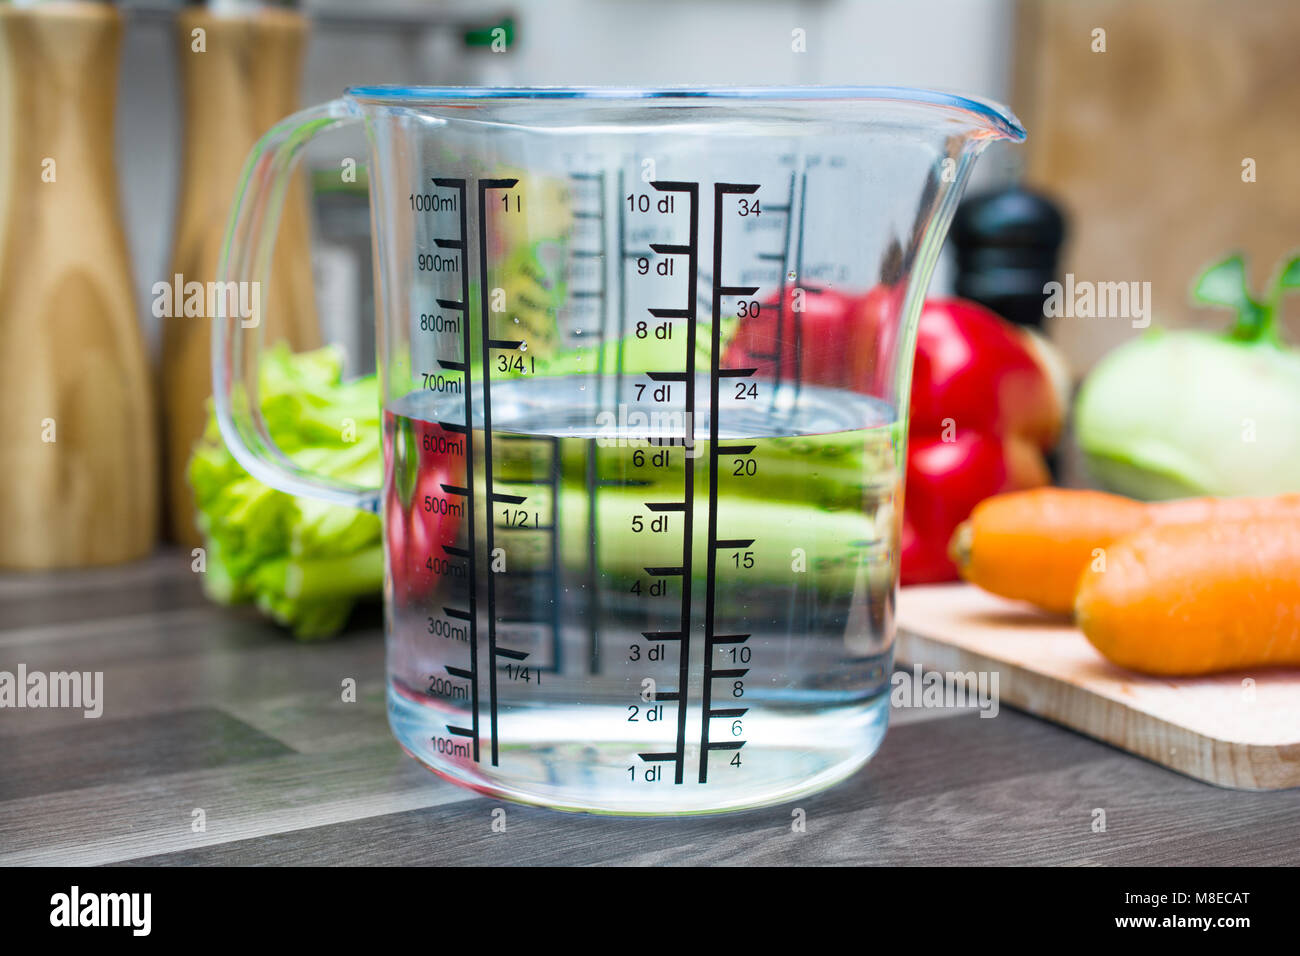 600ml / 6dl Of Water In A Measuring Cup On A Kitchen Counter With  Vegetables Stock Photo - Alamy